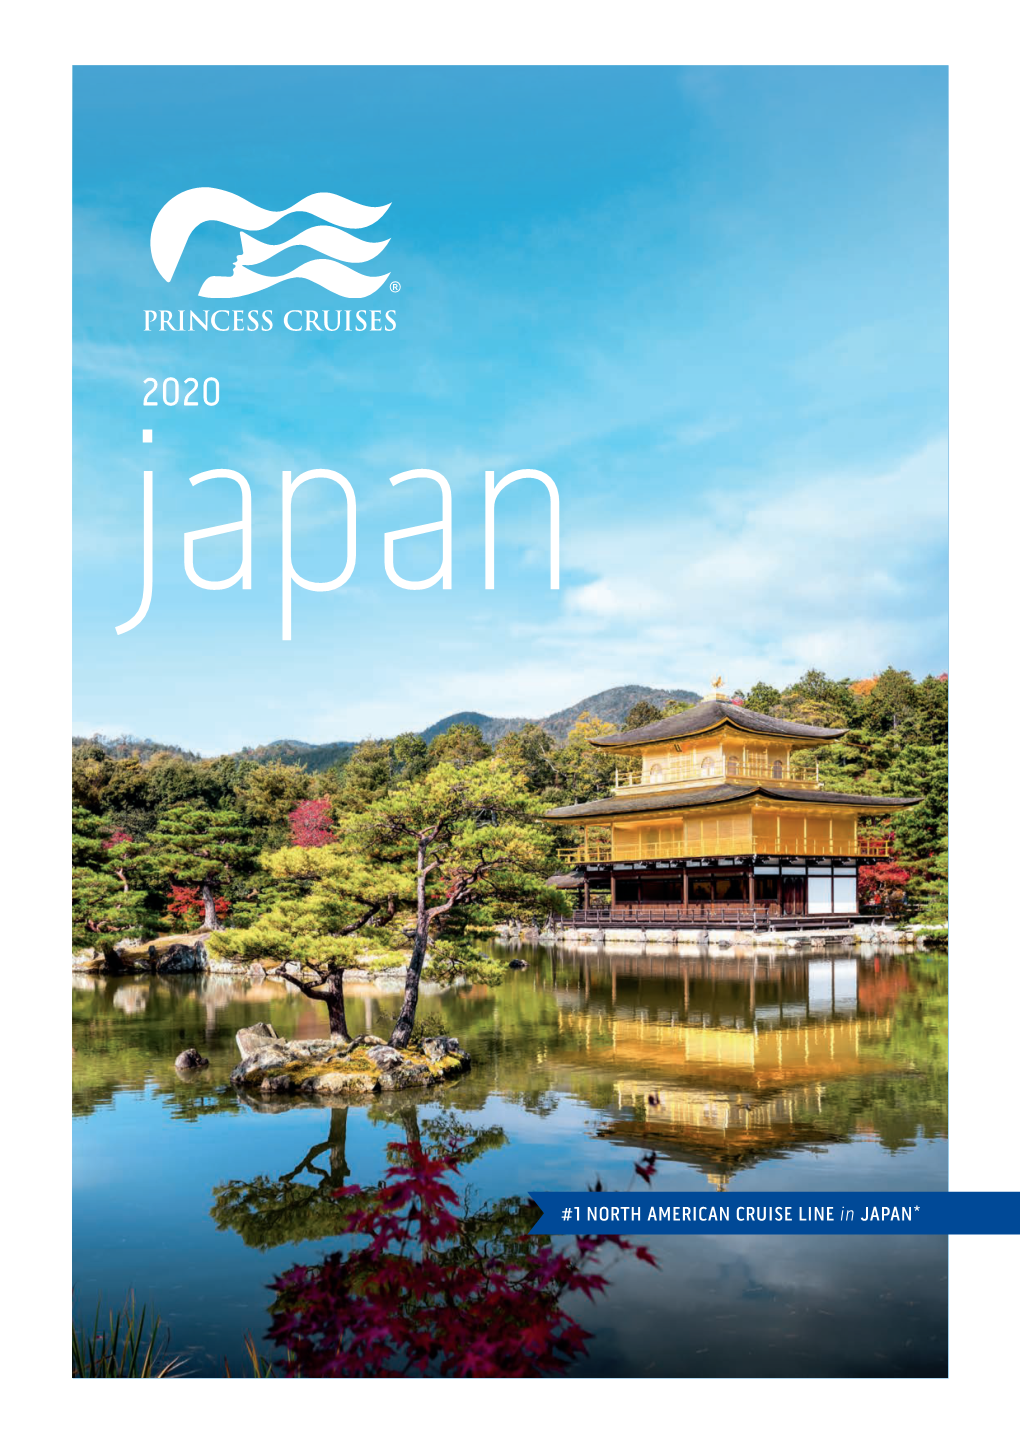 1 NORTH AMERICAN CRUISE LINE in JAPAN* Uncover the Stories of Japan the Ancient Stories of Japan Seem to Echo Even in Modern Day